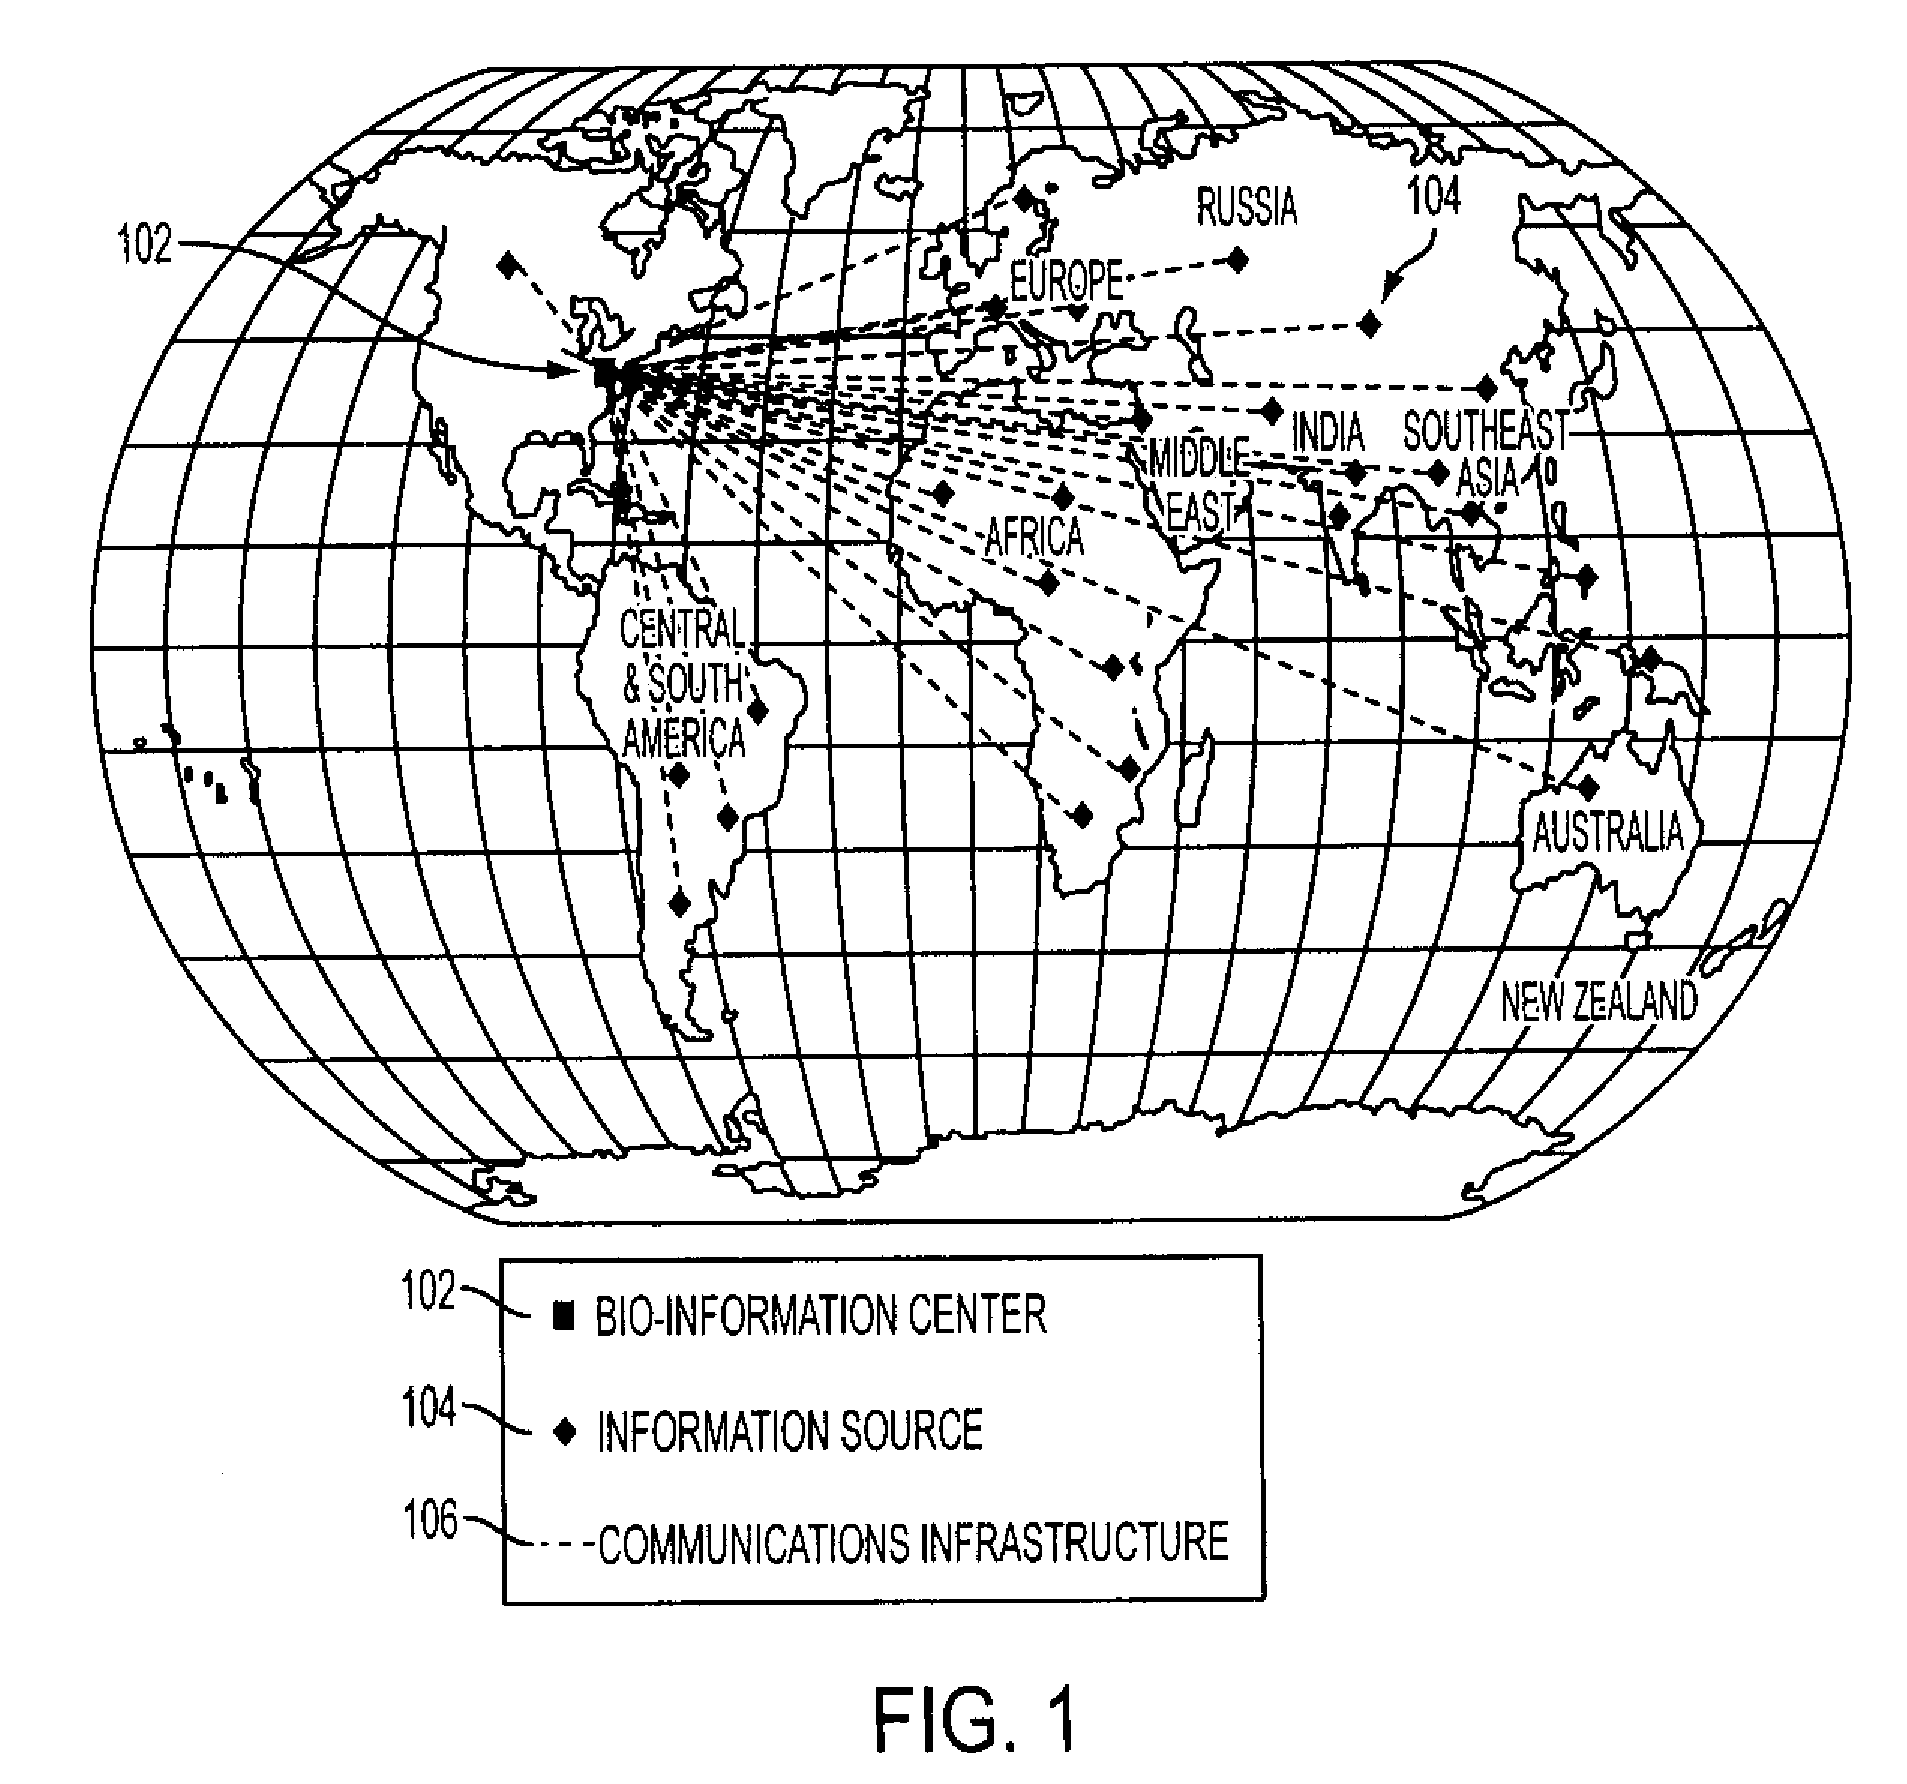 System and method for detecting, collecting, analyzing, and communicating event related information